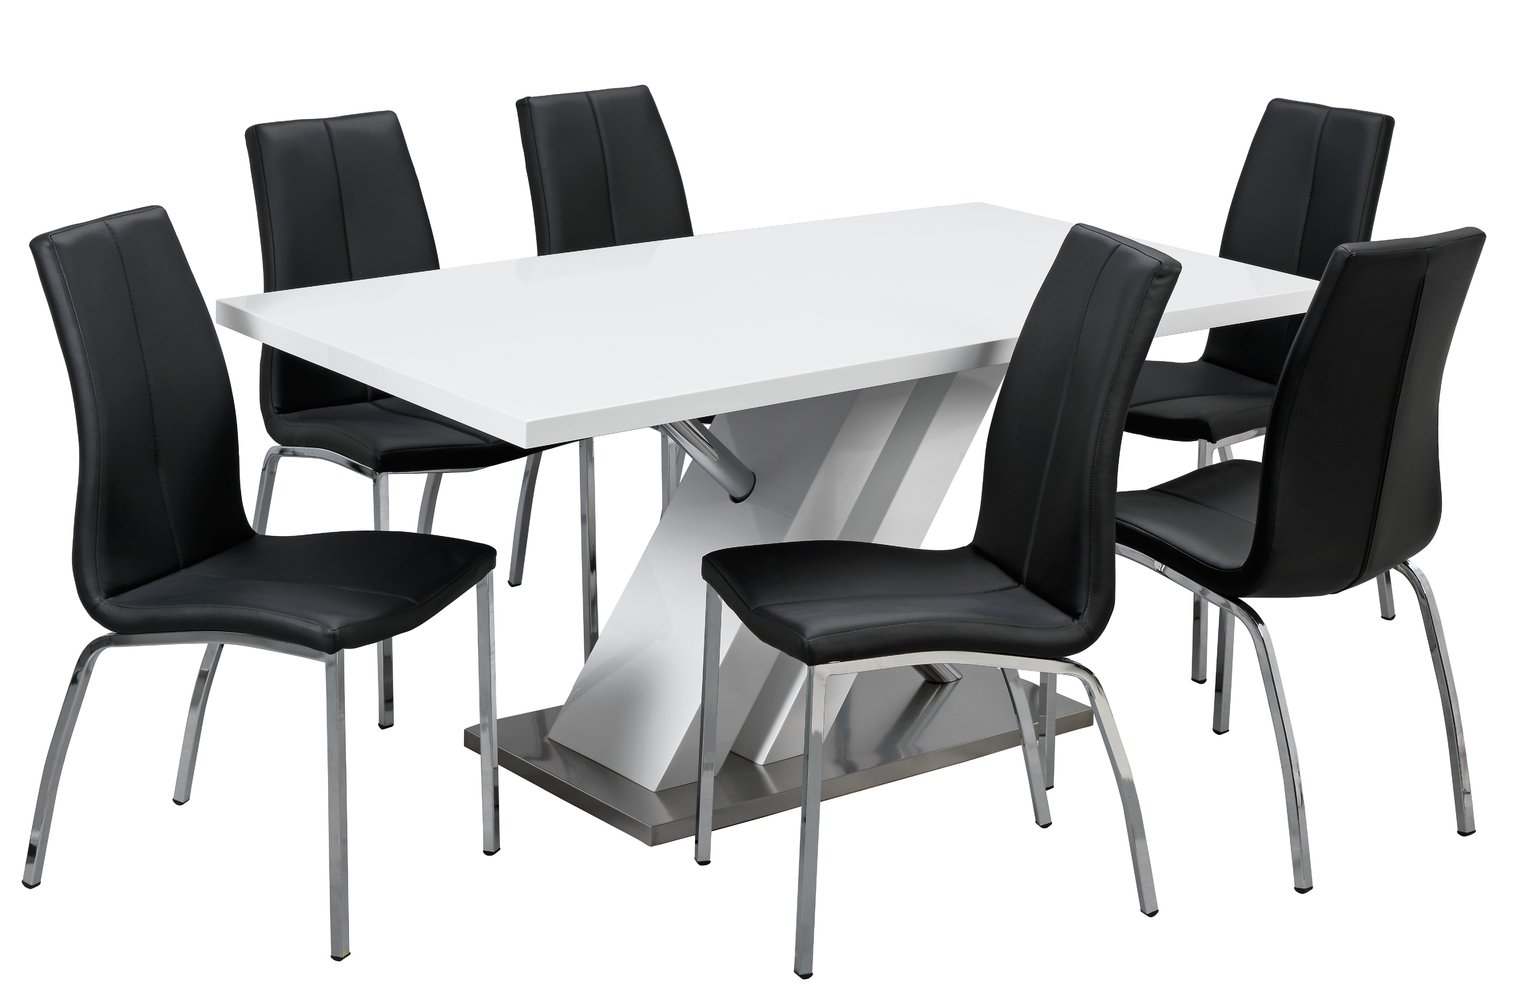 Argos Home Belvoir White Gloss Dining Table & 6 Black Chairs